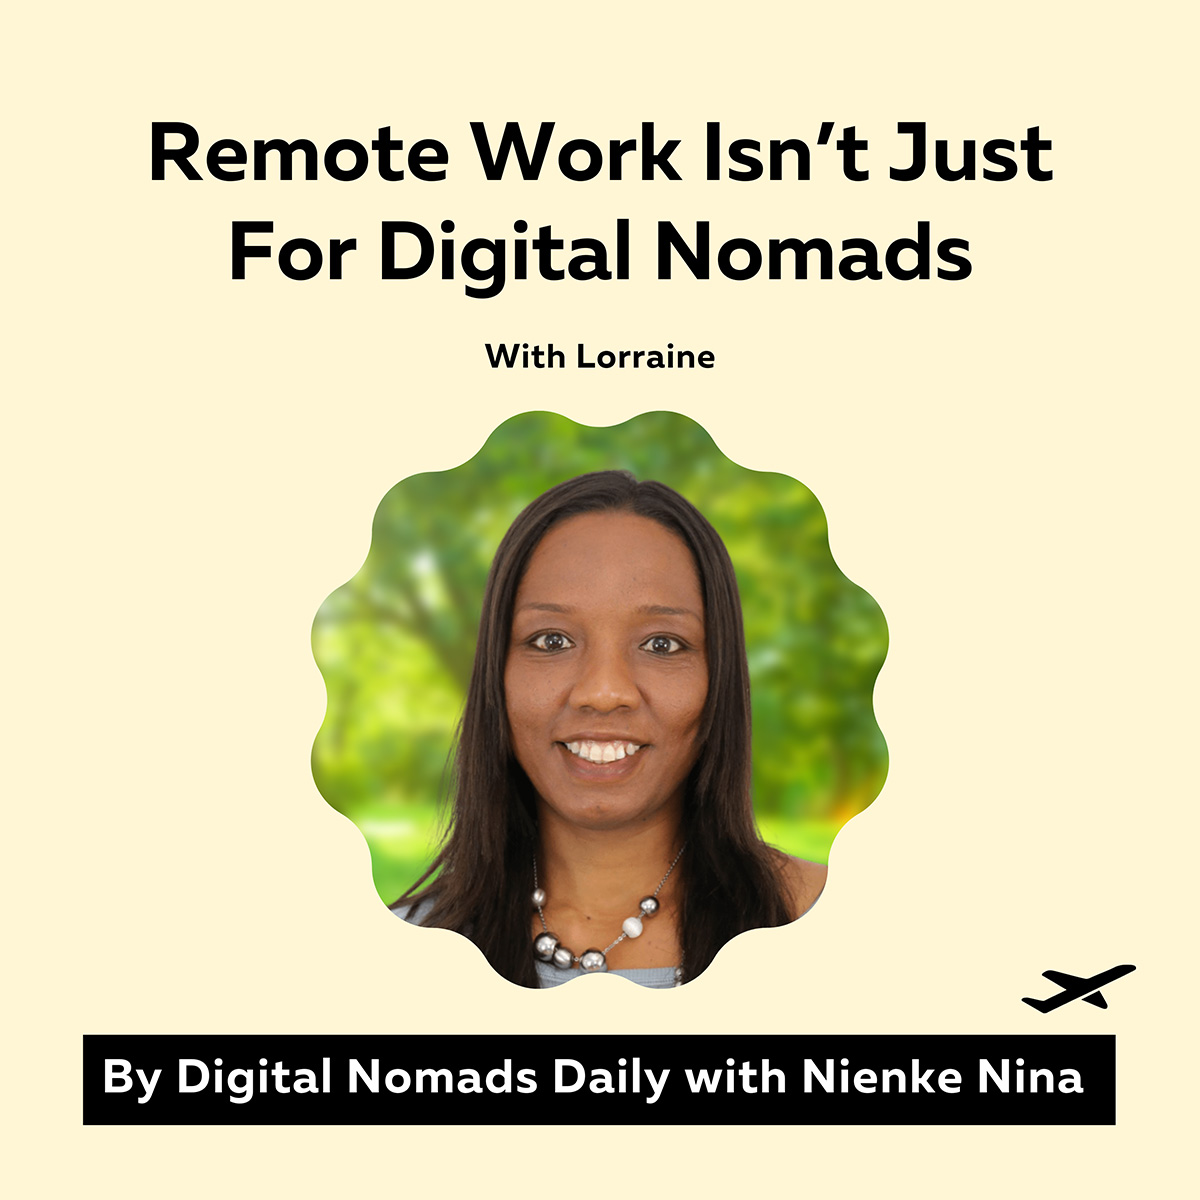 Digital Nomads Daily Podcast Cover episode 43 Naamal podcast cover Remote Work Isn’t Just For Digital Nomads With Lorraine